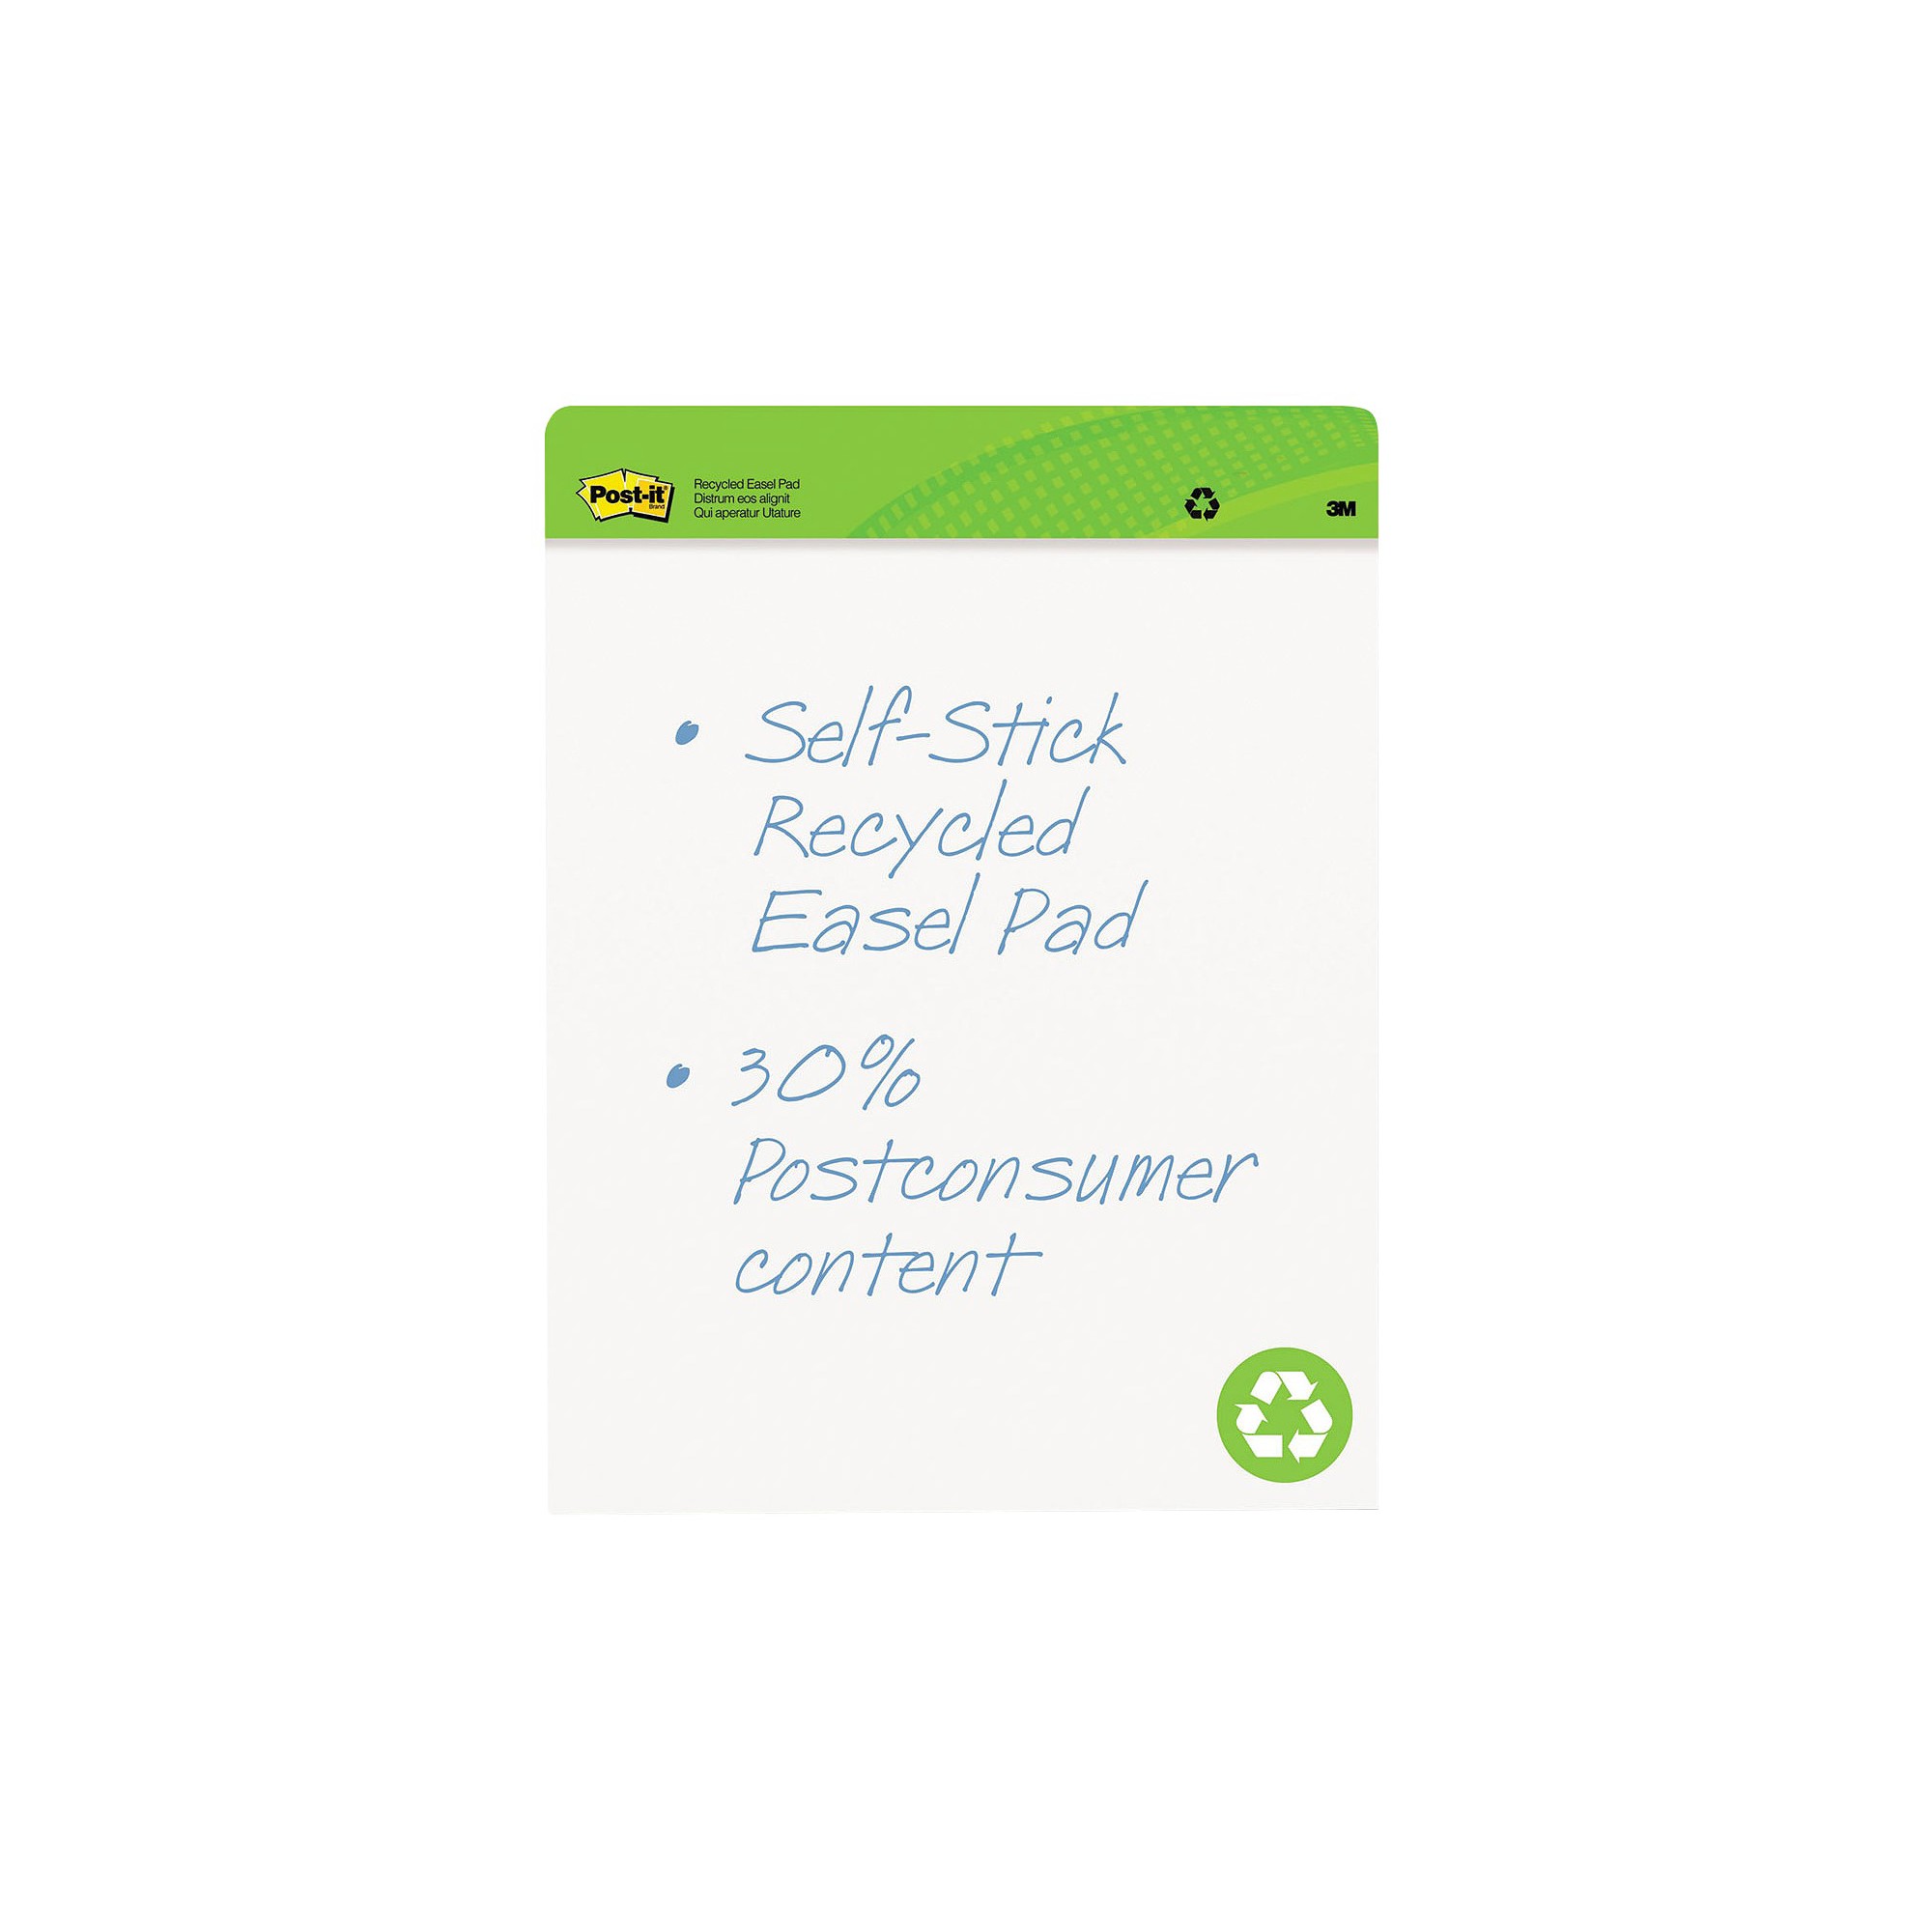 Post-it Recycled Self-Stick Easel Pads - White (30 Sheets Per Pad